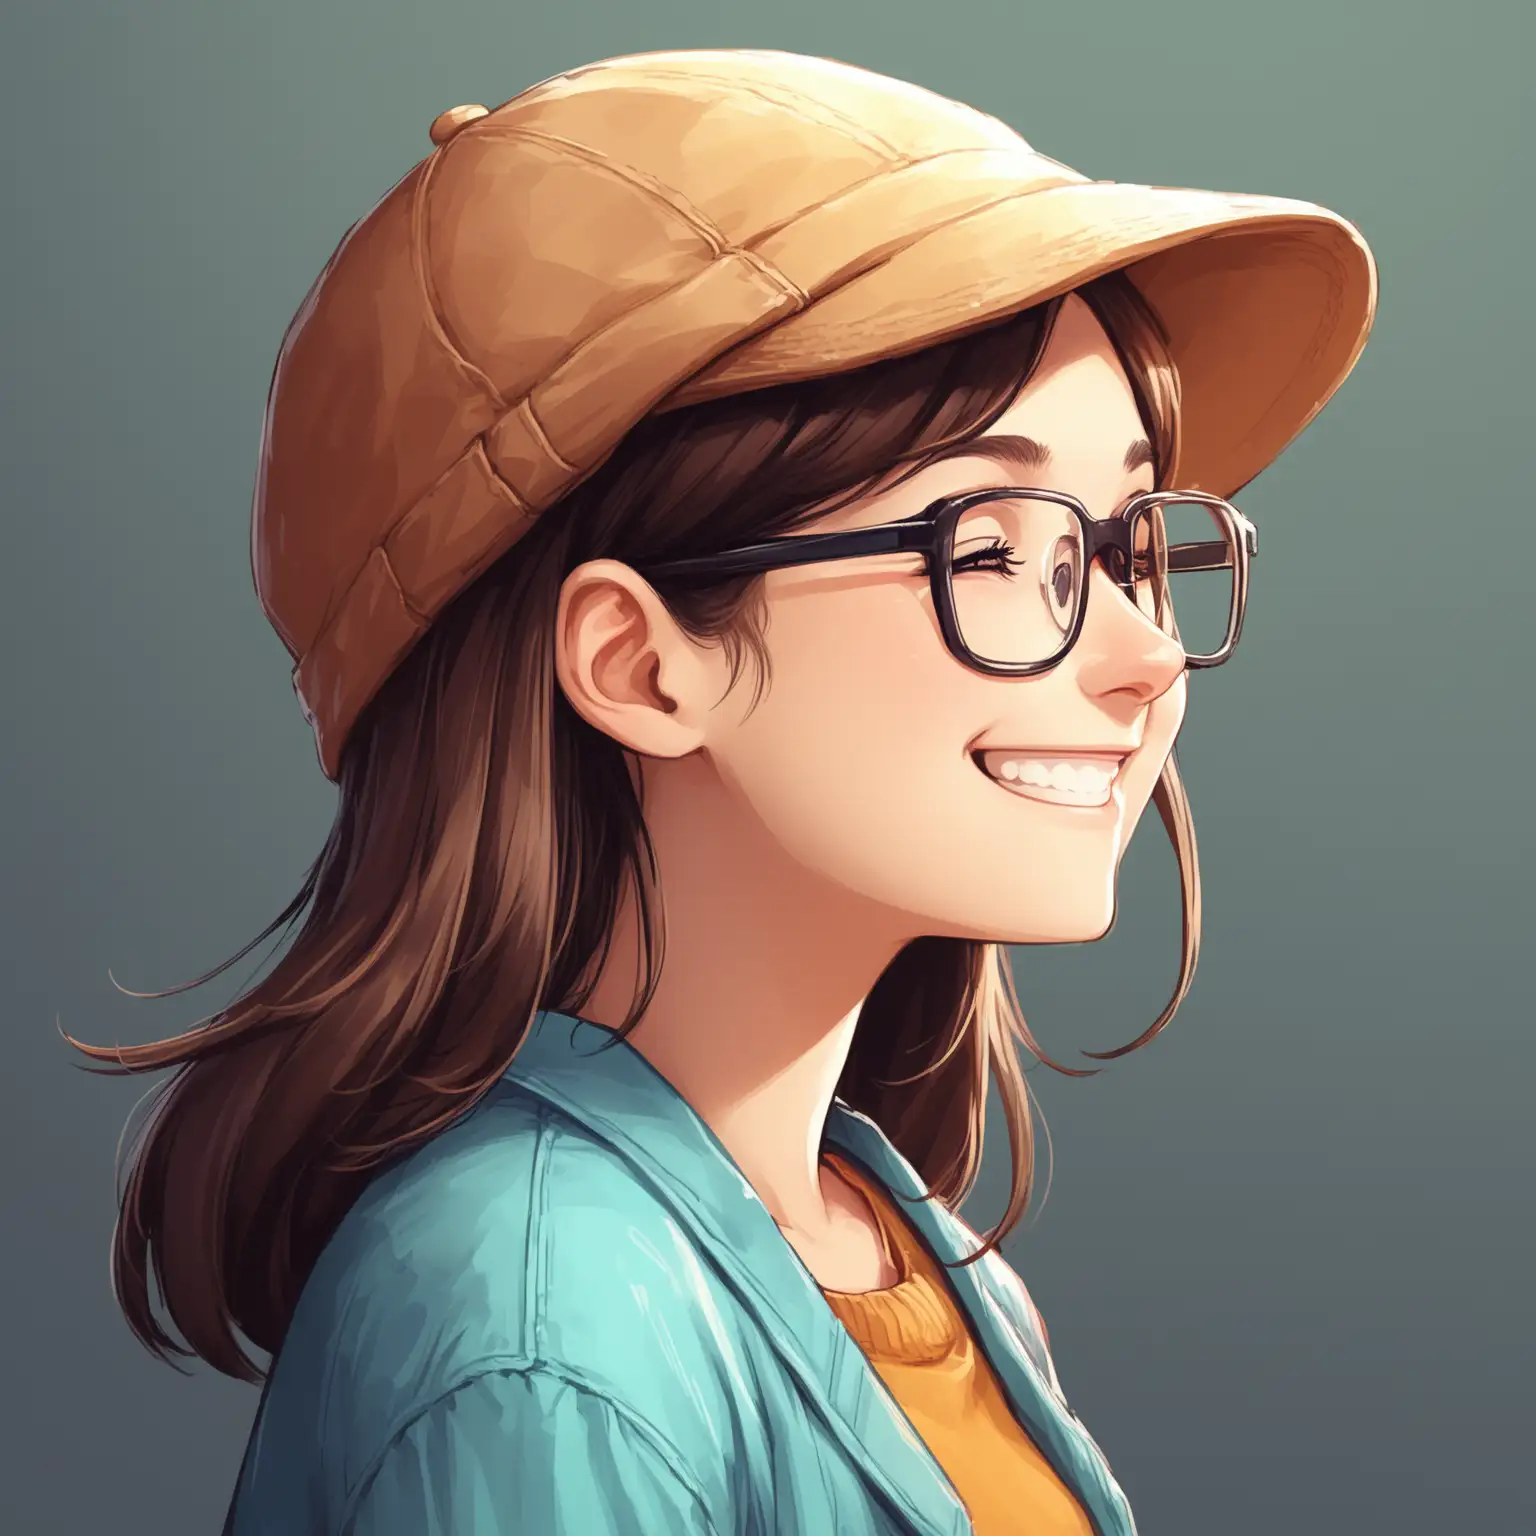 Cheerful-Girl-in-Glasses-with-Programmer-Hat-Smiling-Profile